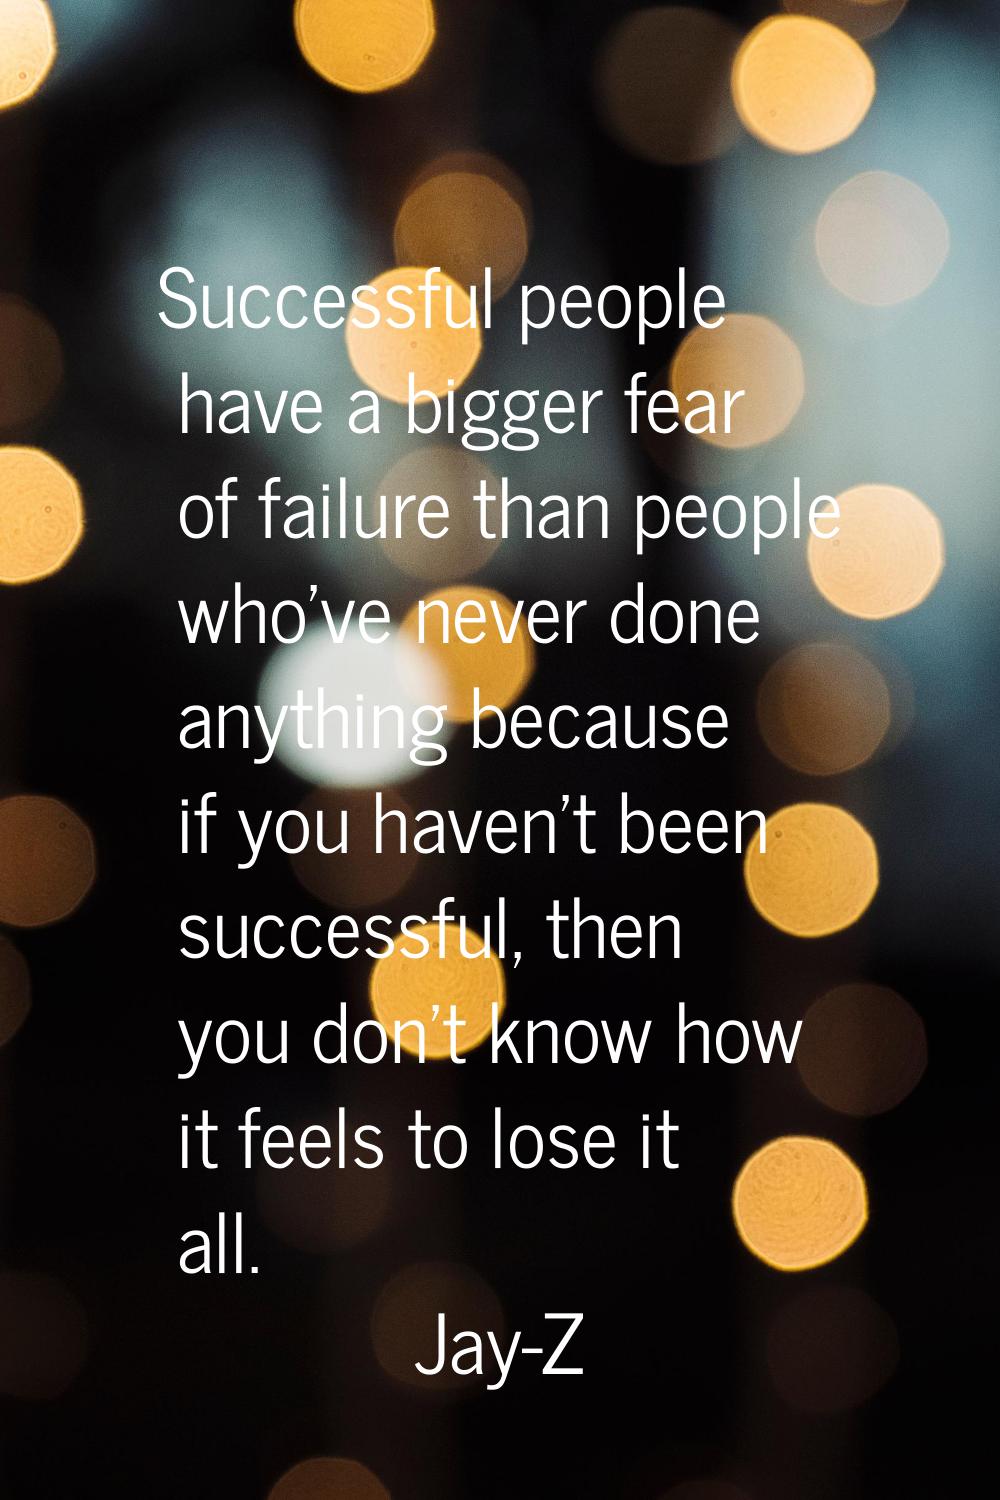 Successful people have a bigger fear of failure than people who've never done anything because if y